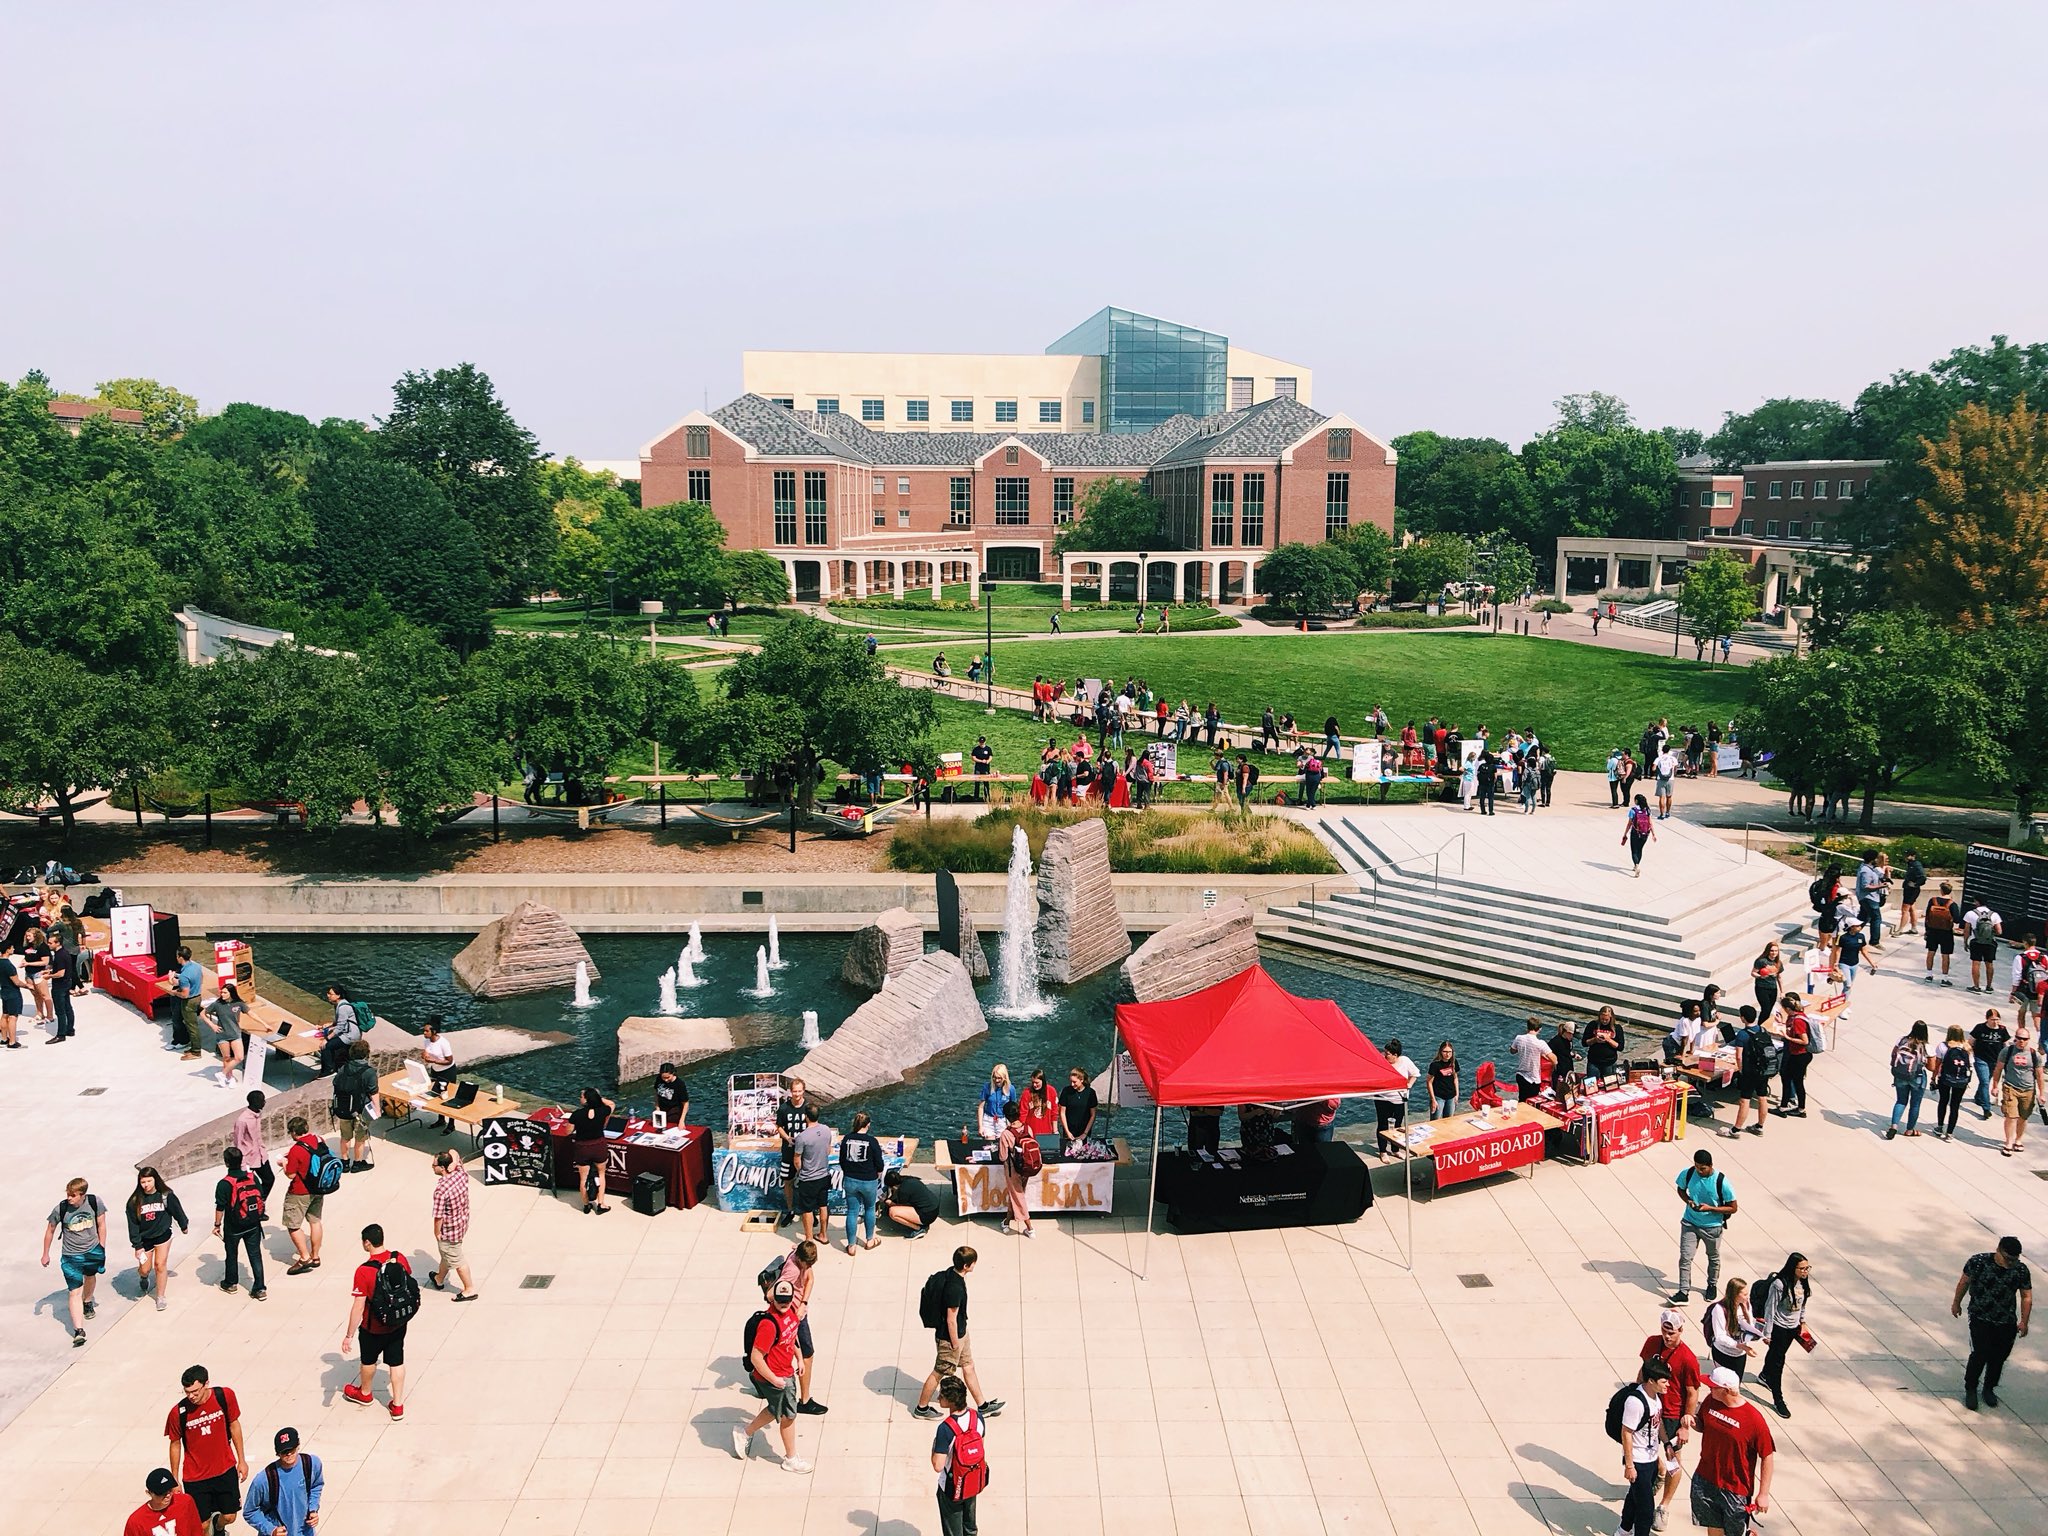 The University of Nebraska-Lincoln offers a plethora of opportunities to students beyond the classroom, from student government and organizations, to cultural events and community volunteering.